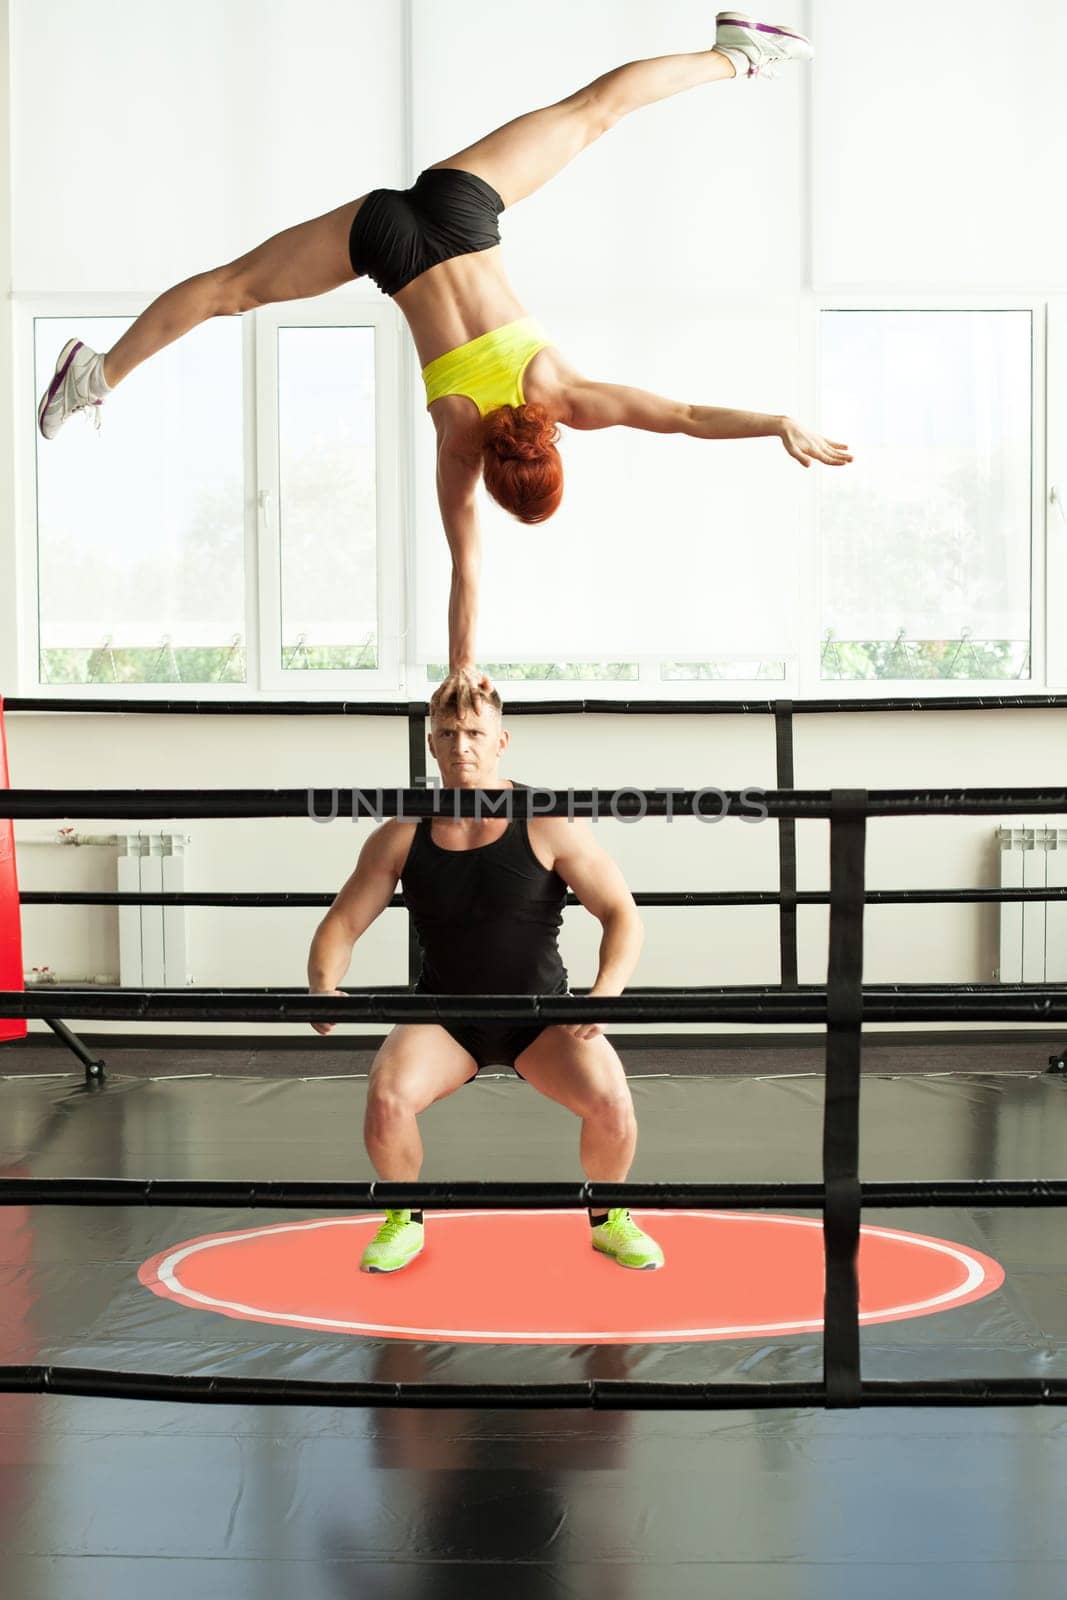 Image of strong man doing acrobatic rack with his partner